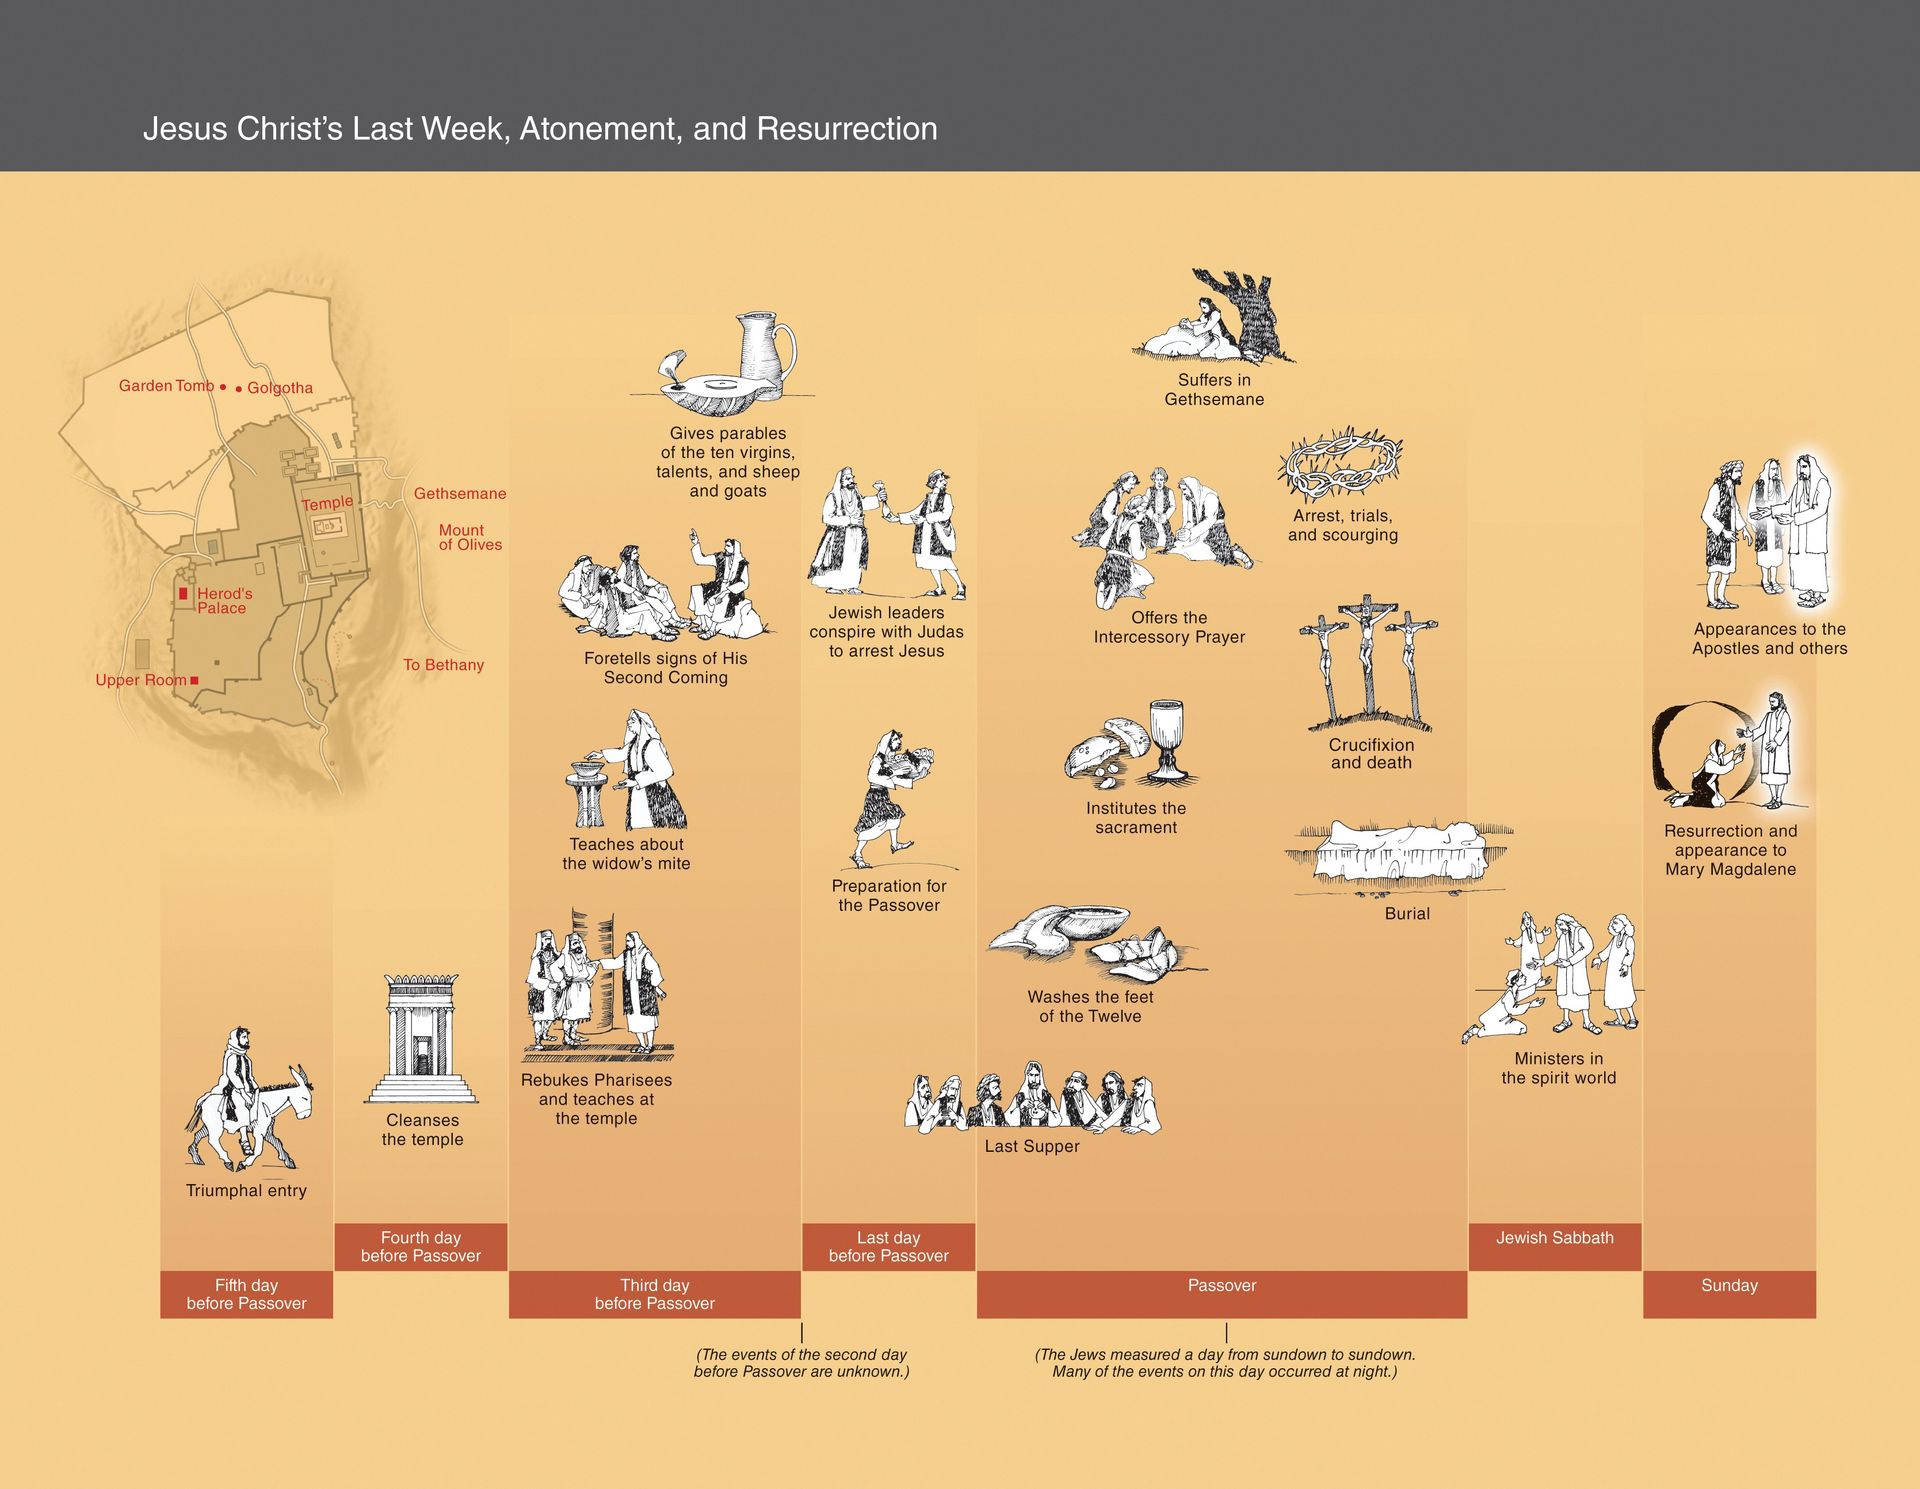 A graphic outlining the final events of Christ’s life up through the Resurrection.